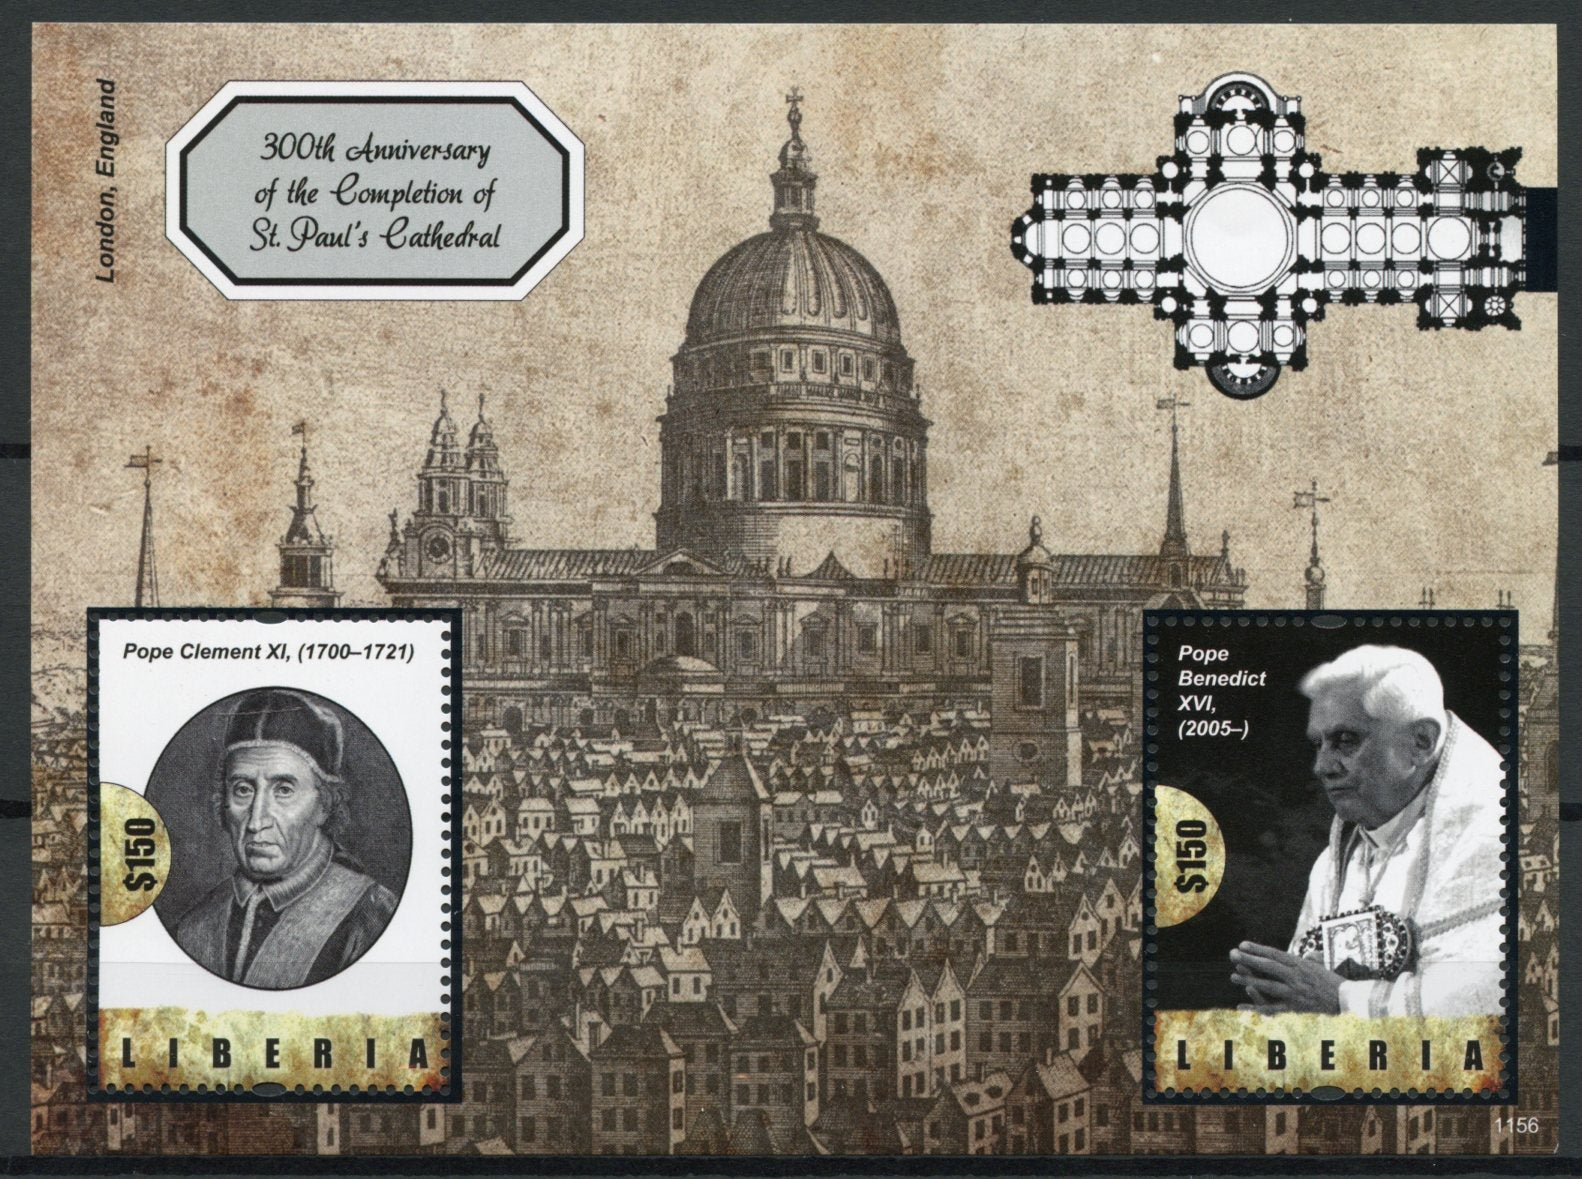 Liberia 2011 MNH St Paul's Cathedral Completion 300th Anniv 2v S/S Pope Benedict